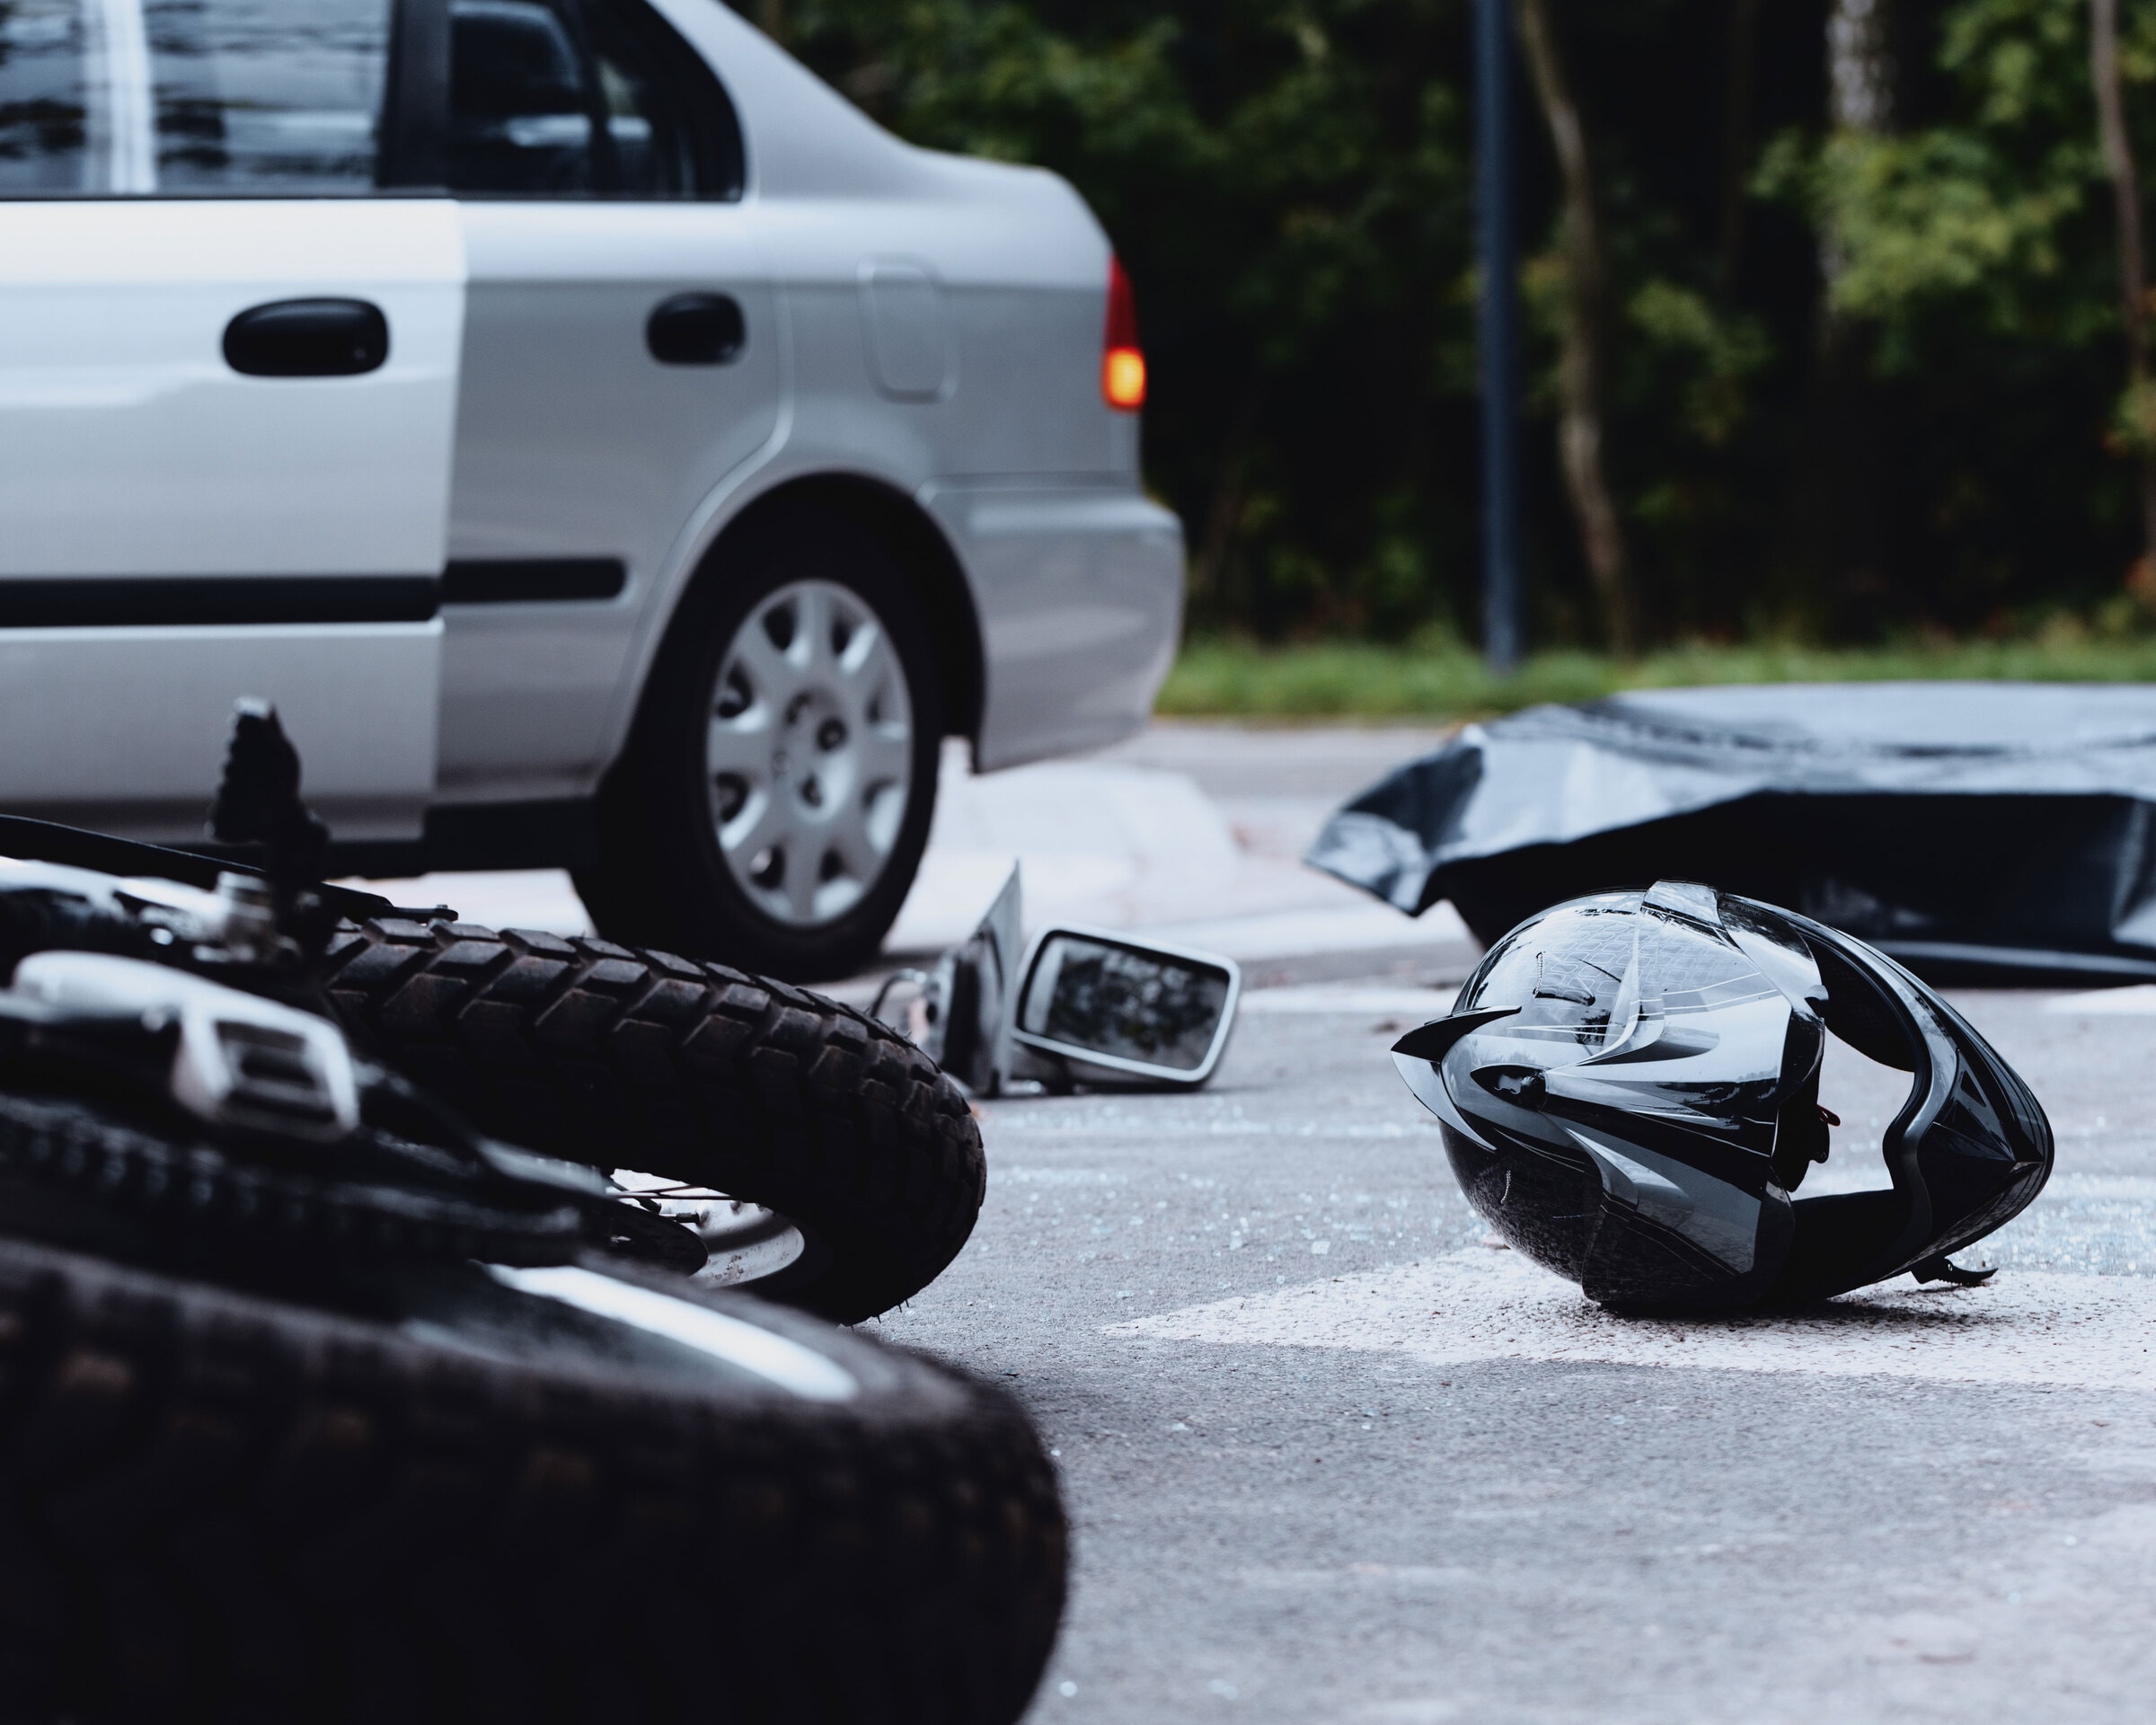 Reliable lawyers who are dedicated to providing support and guidance to those affected by car and motor vehicle accidents in Chattanooga